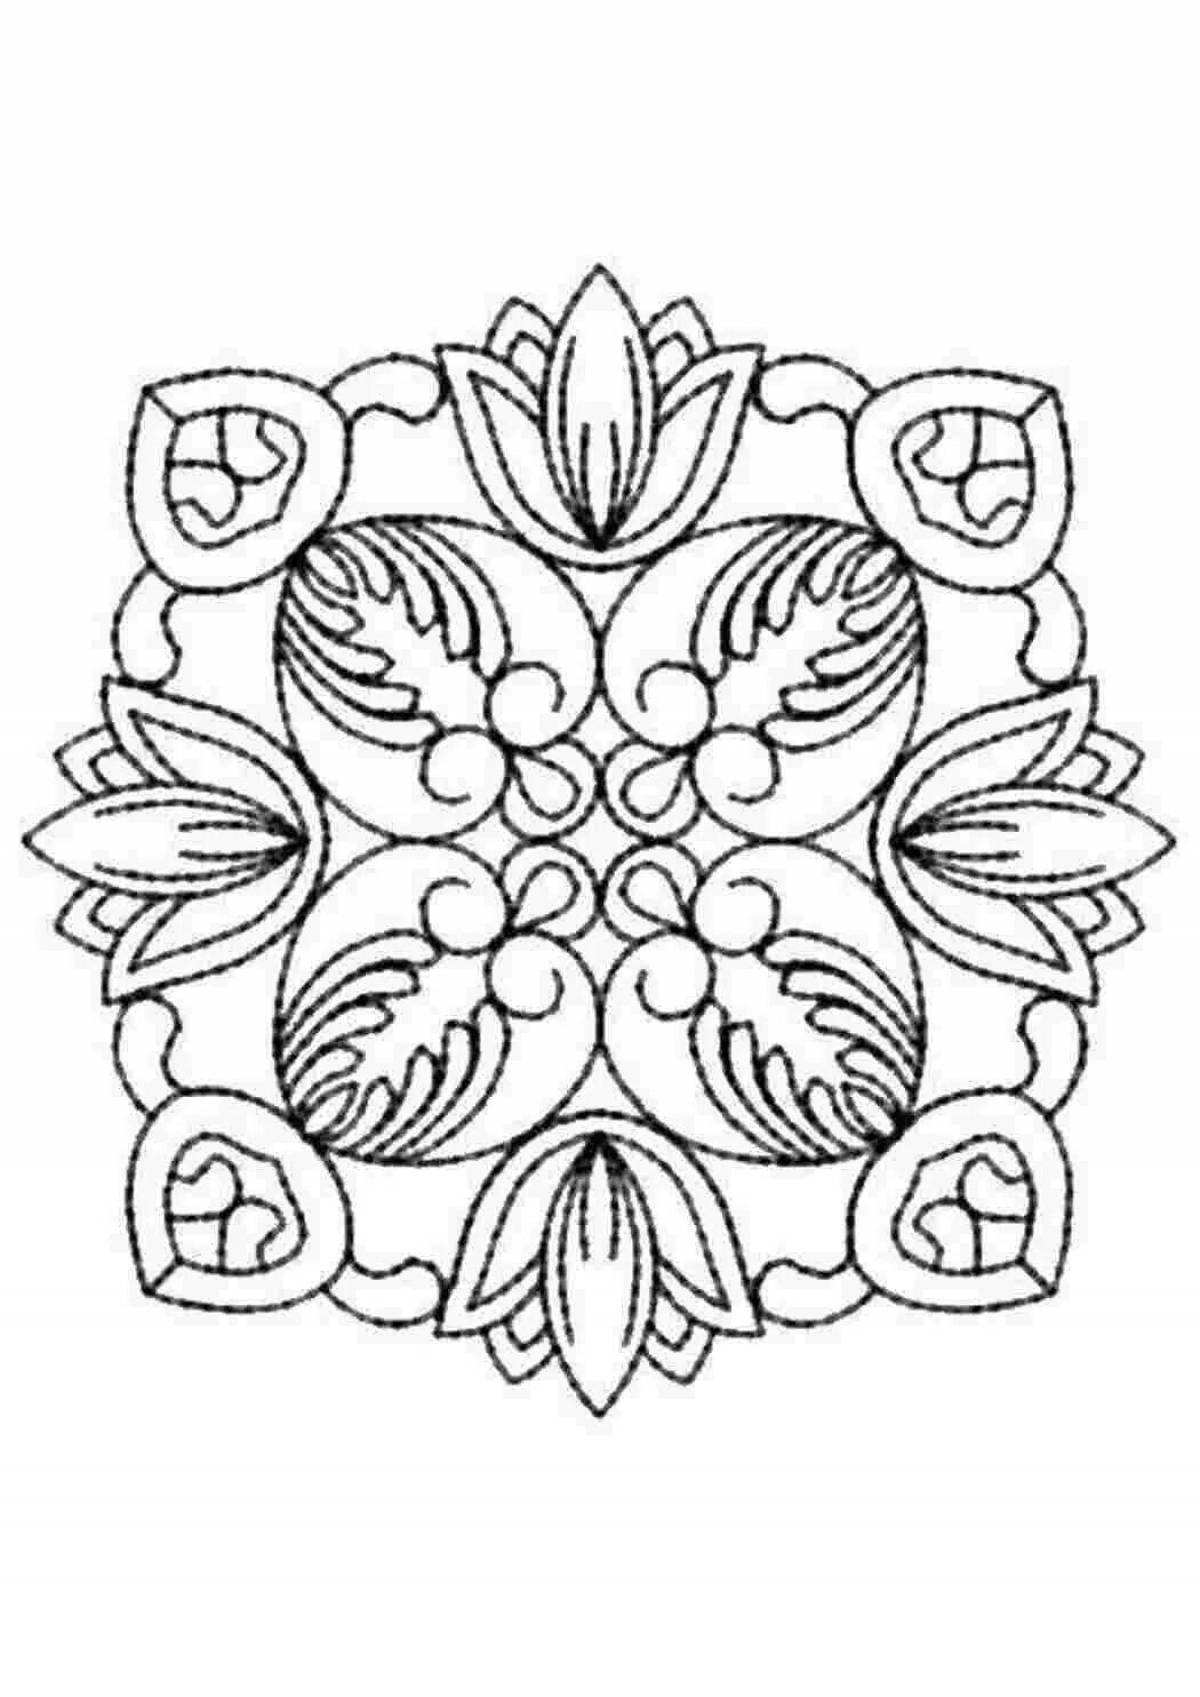 Colored tiles for coloring pages